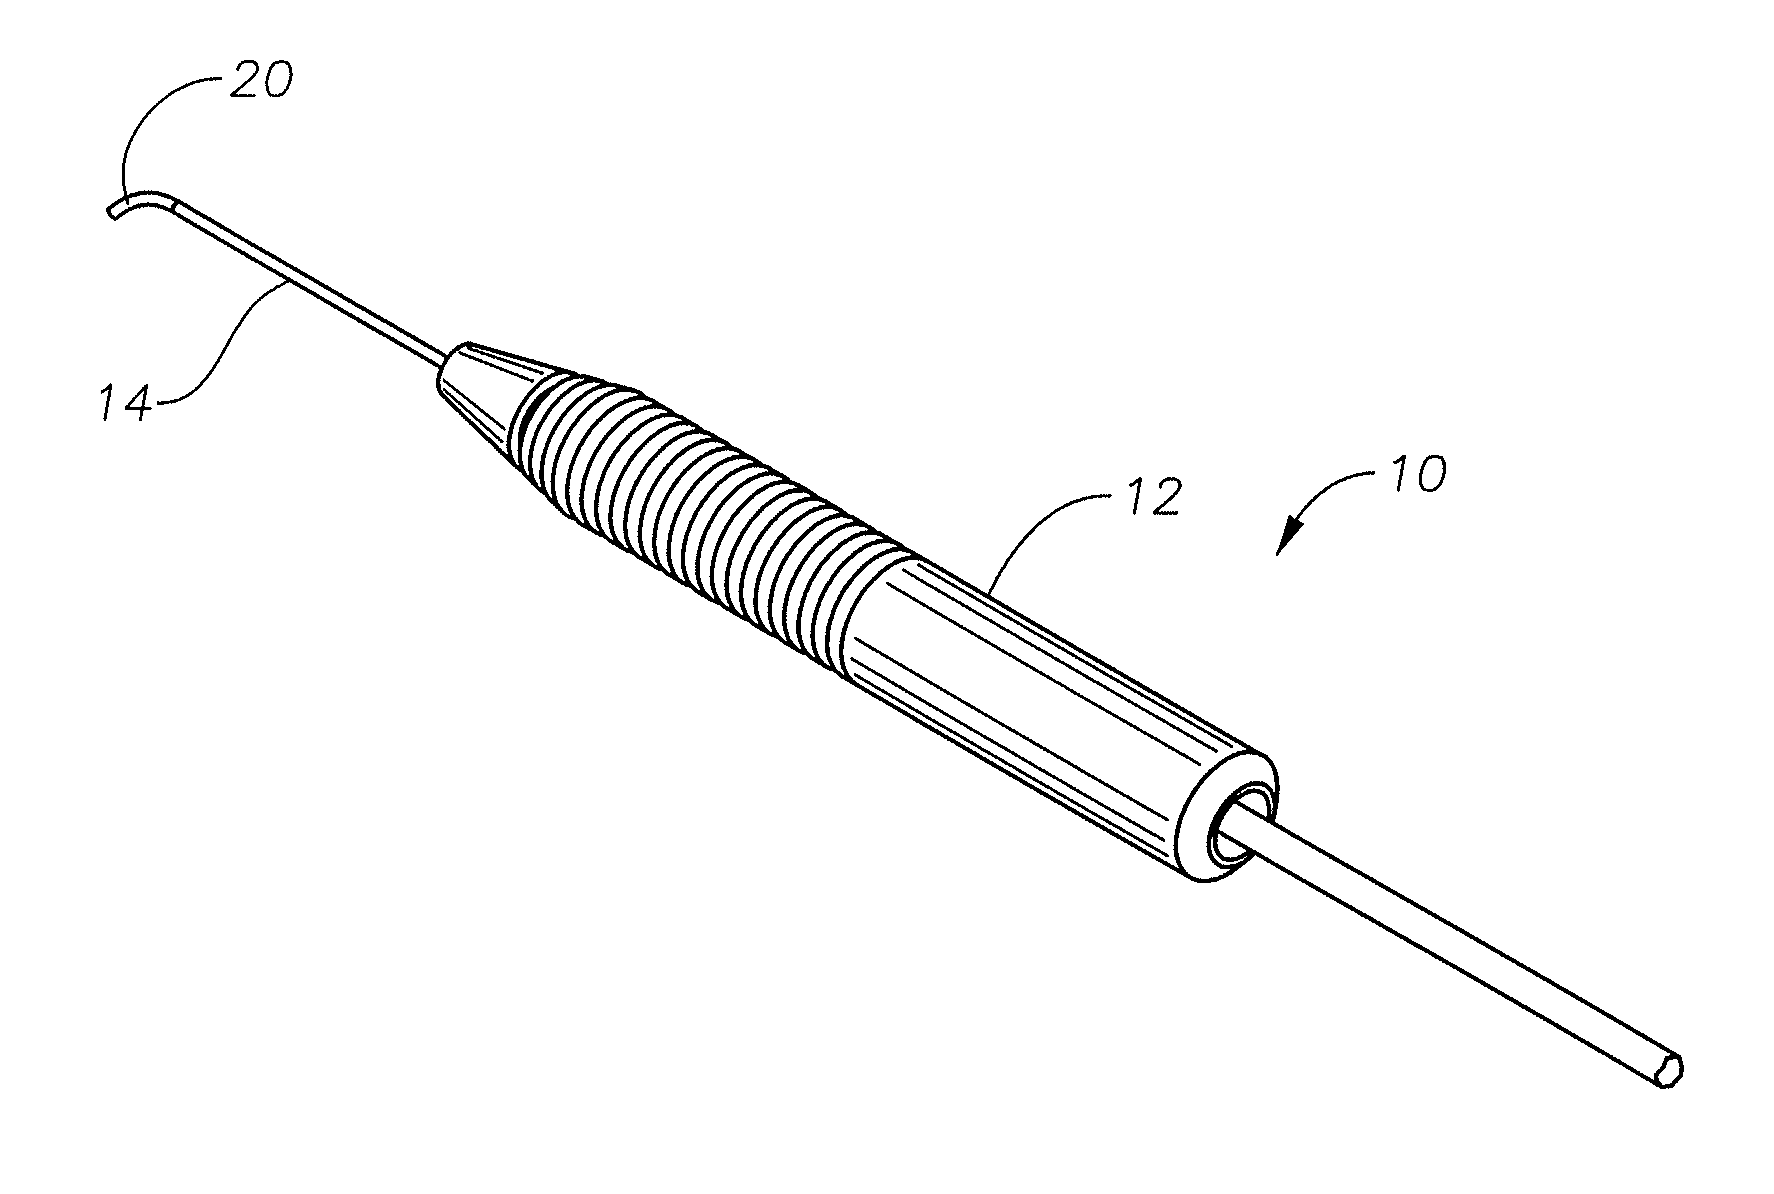 Articulating ophthalmic surgical probe